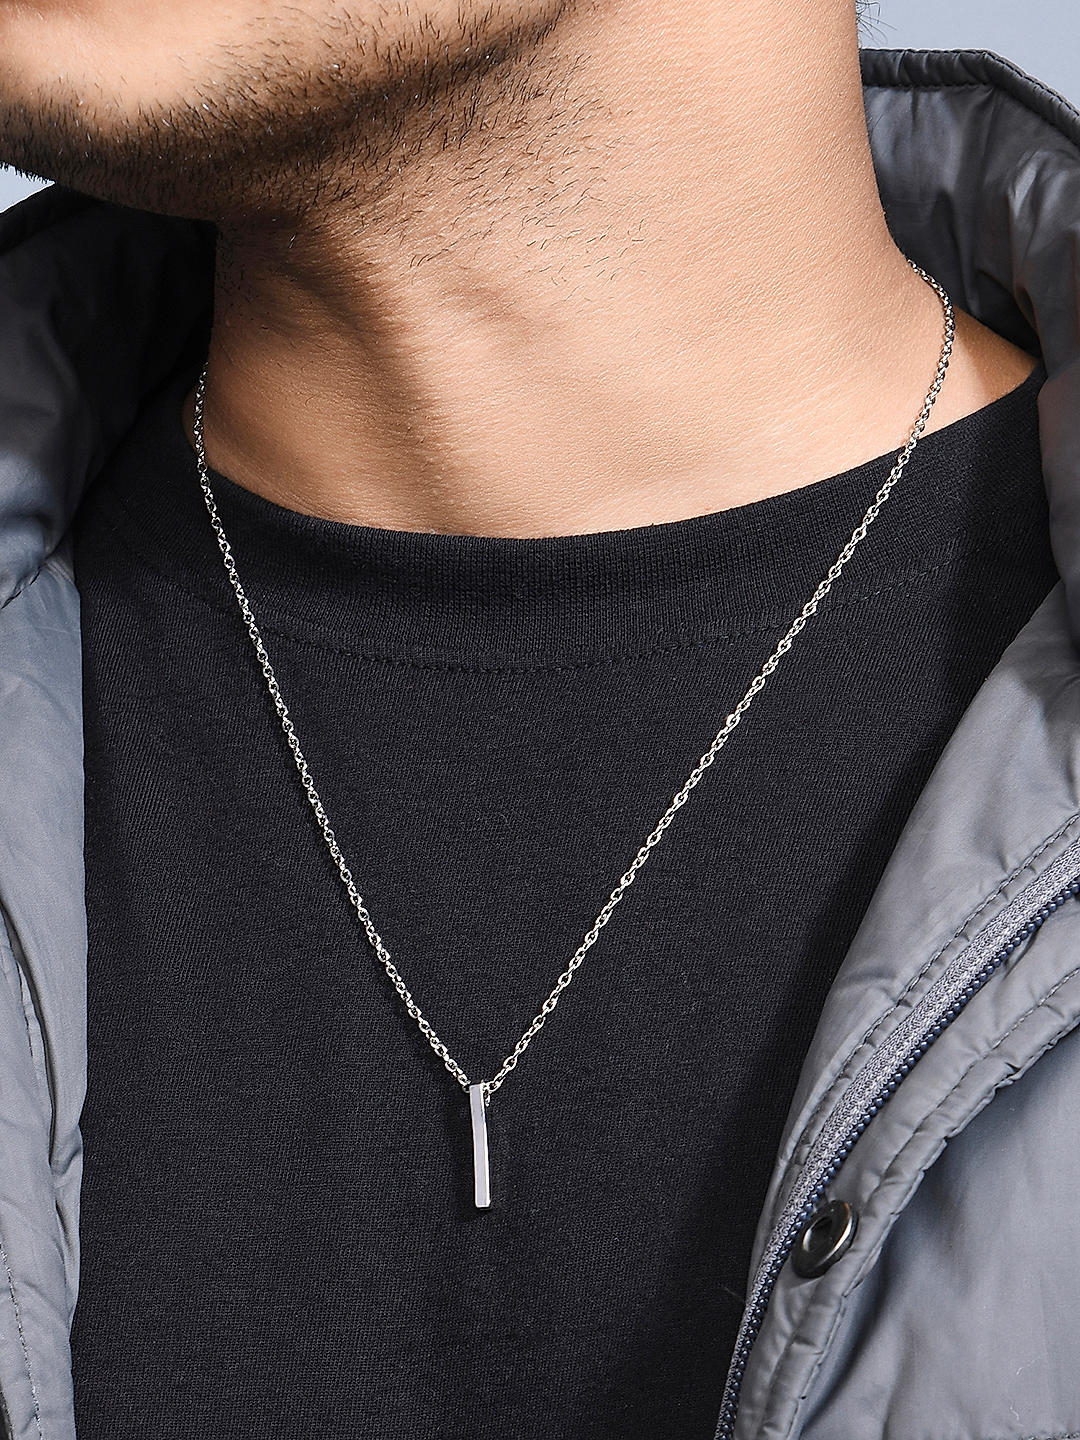 11 Types of Necklaces for Guys by Stephen David Leonard